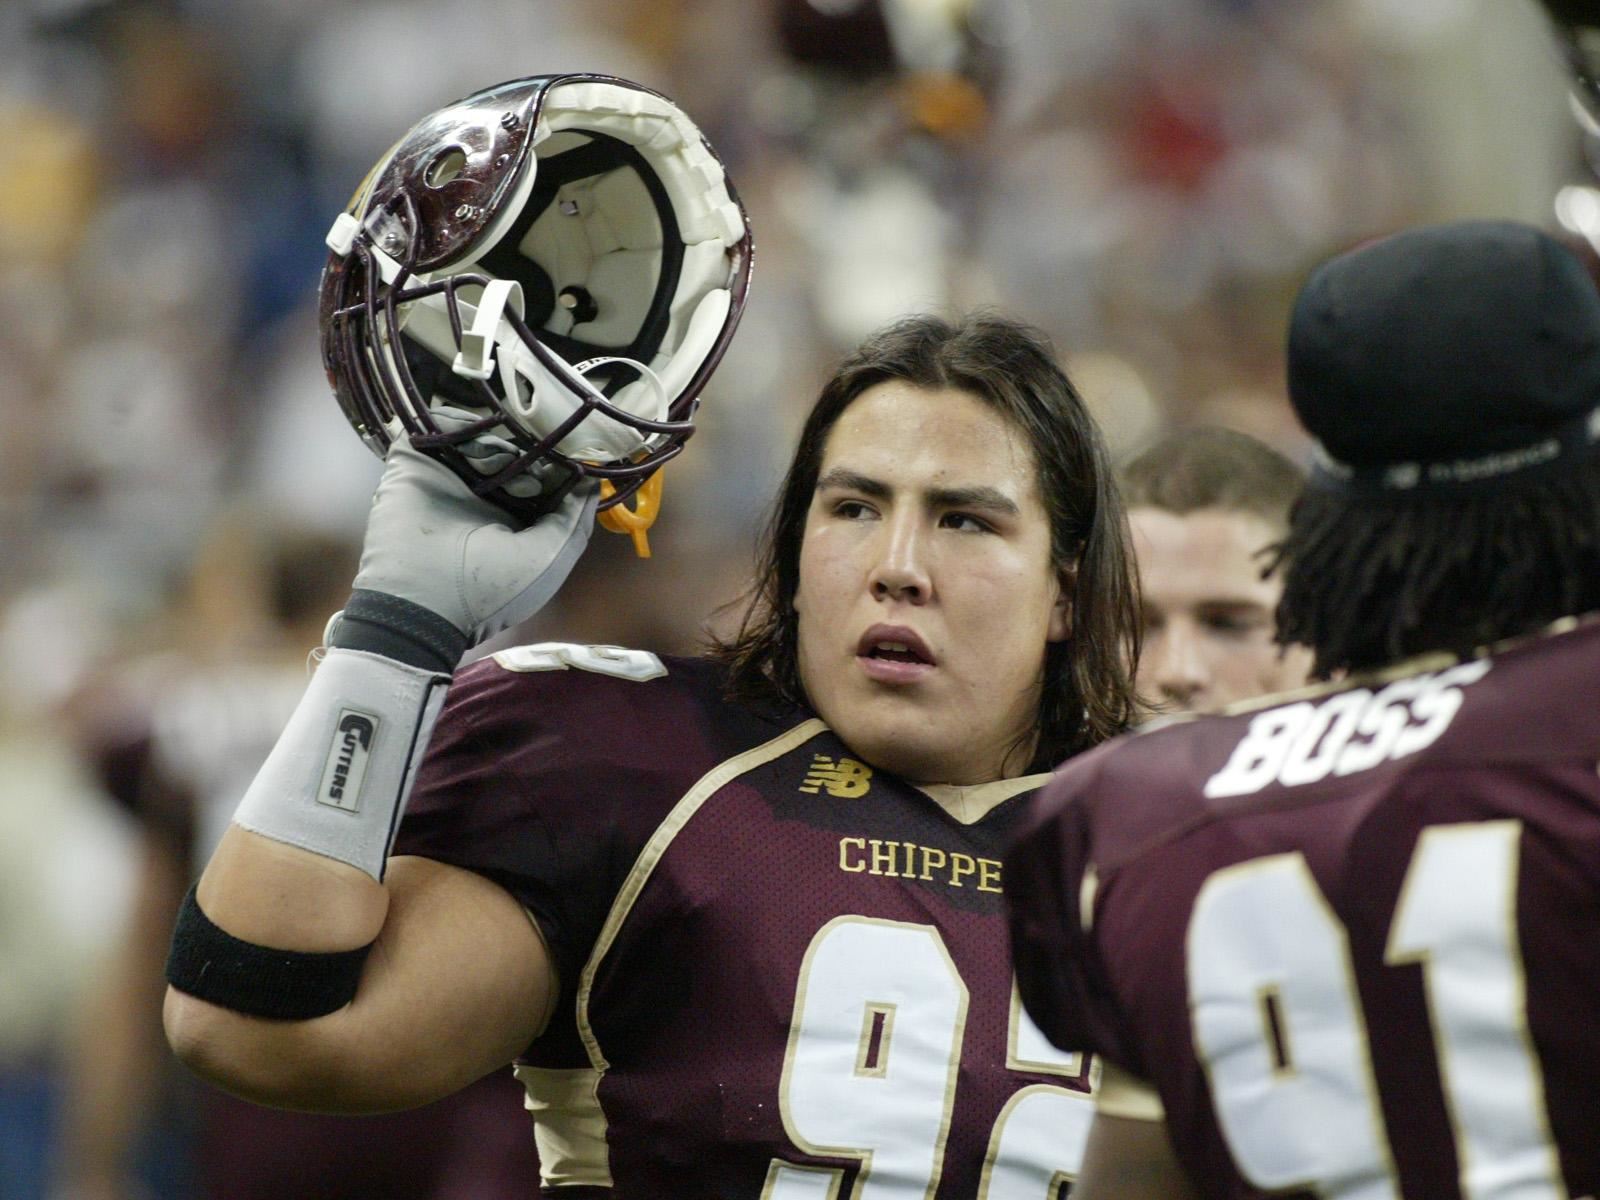 Chief Ronnie Ekdahl, former walk-on, Native kid – the first Chippewa to play for the Chippewa football program – understands what it’s like to start on the bottom rung of the ladder